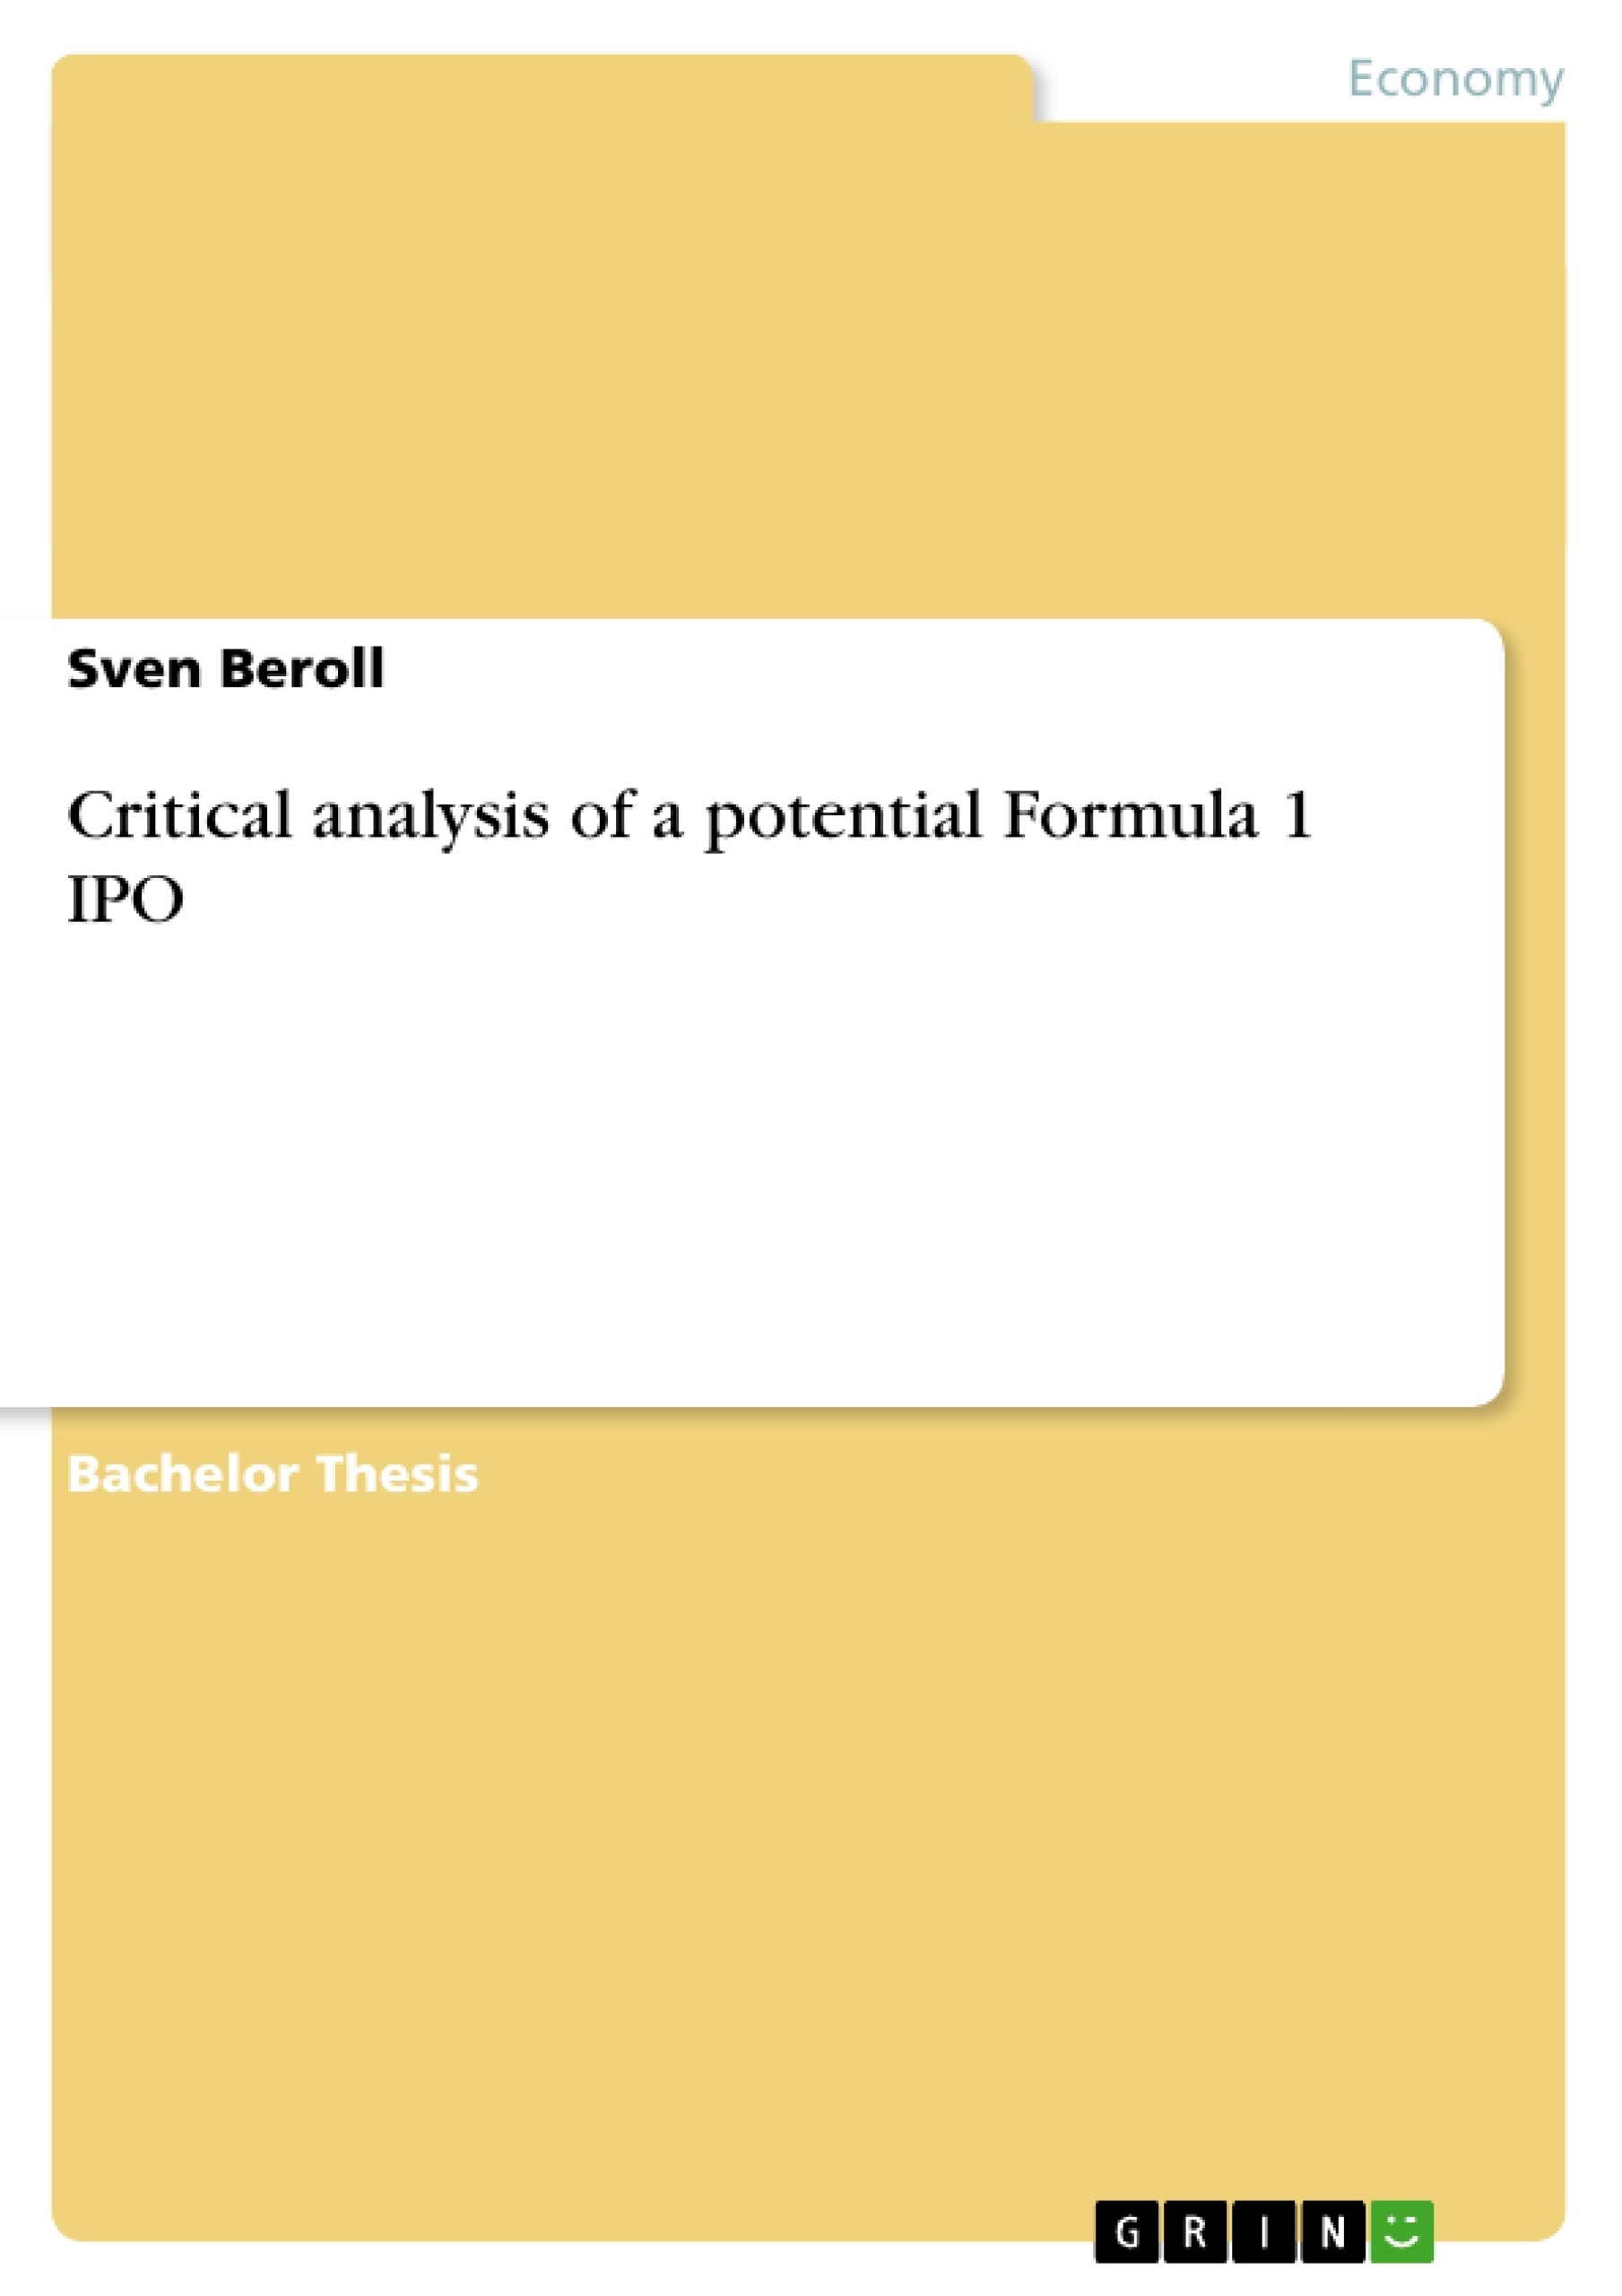 Título: Critical analysis of a potential Formula 1 IPO